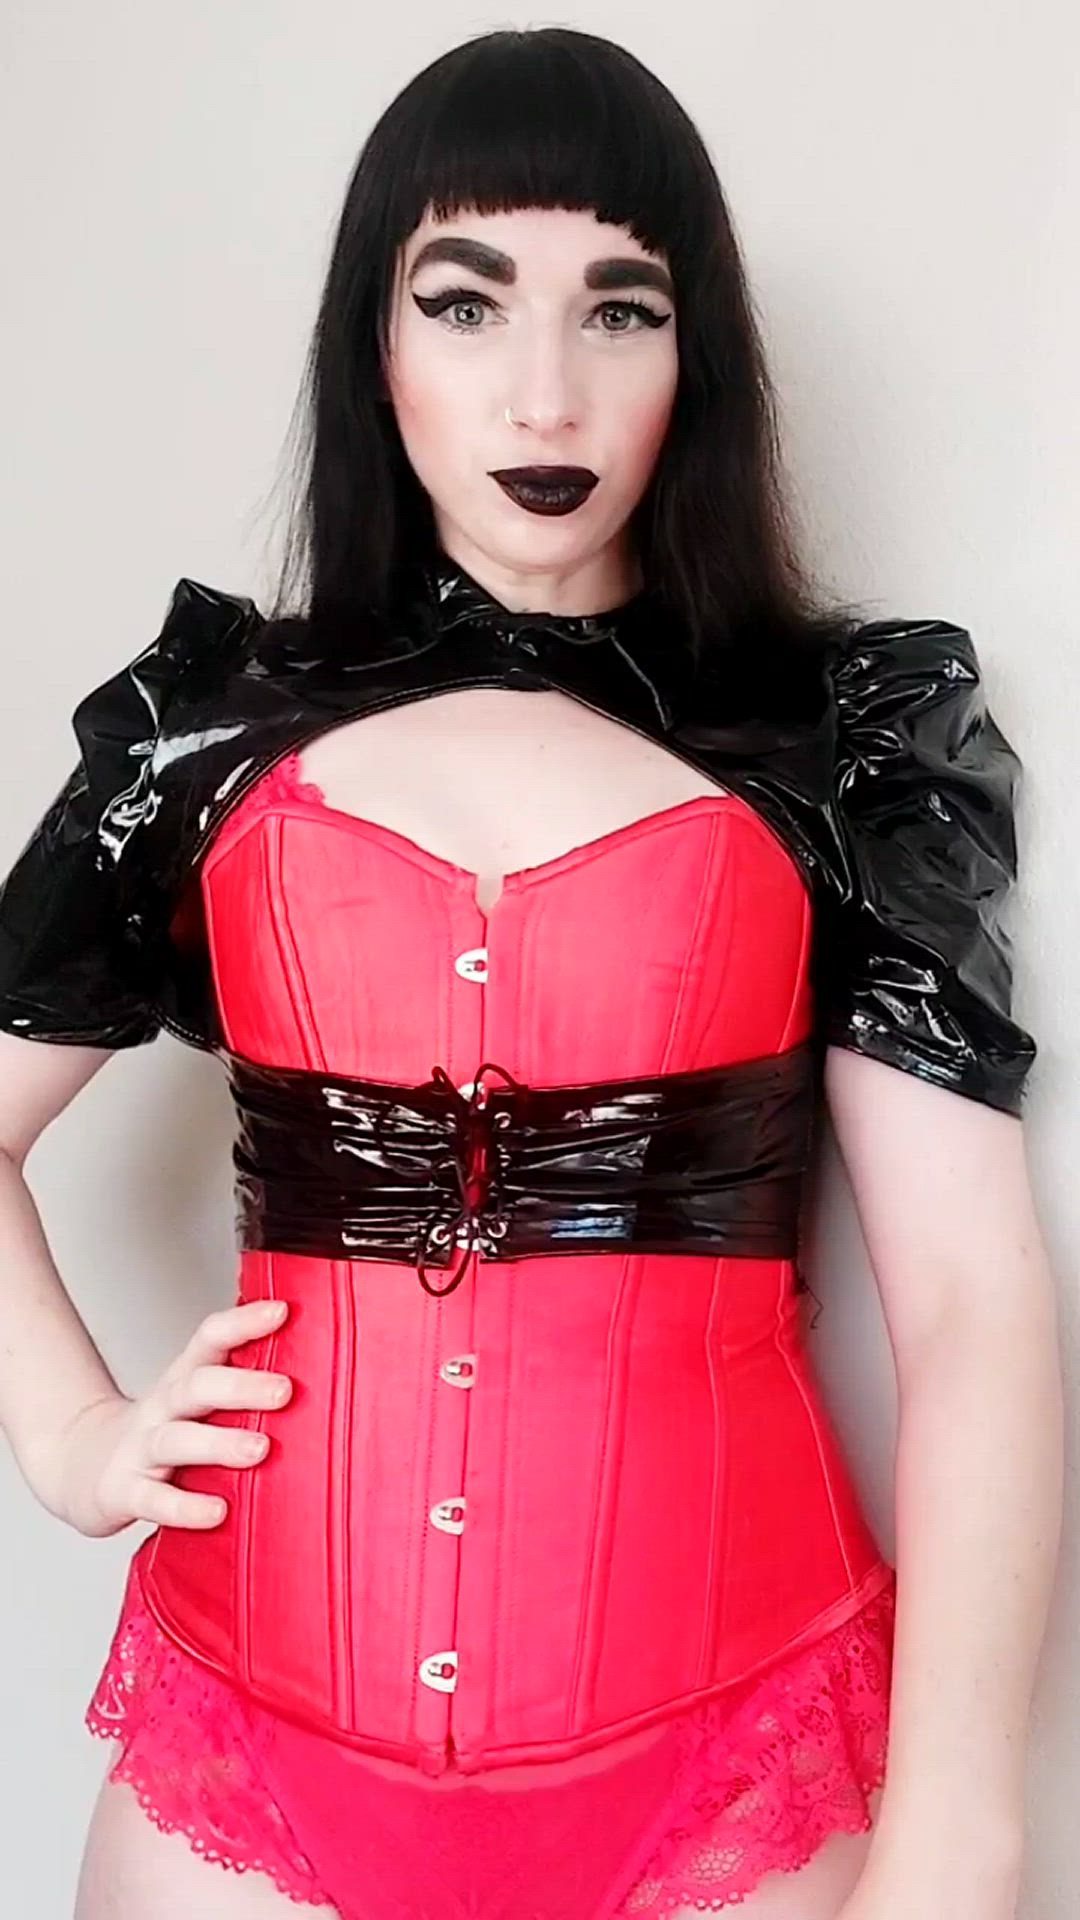 Humiliation porn video with onlyfans model ladystardust333 <strong>@ladystardust33</strong>